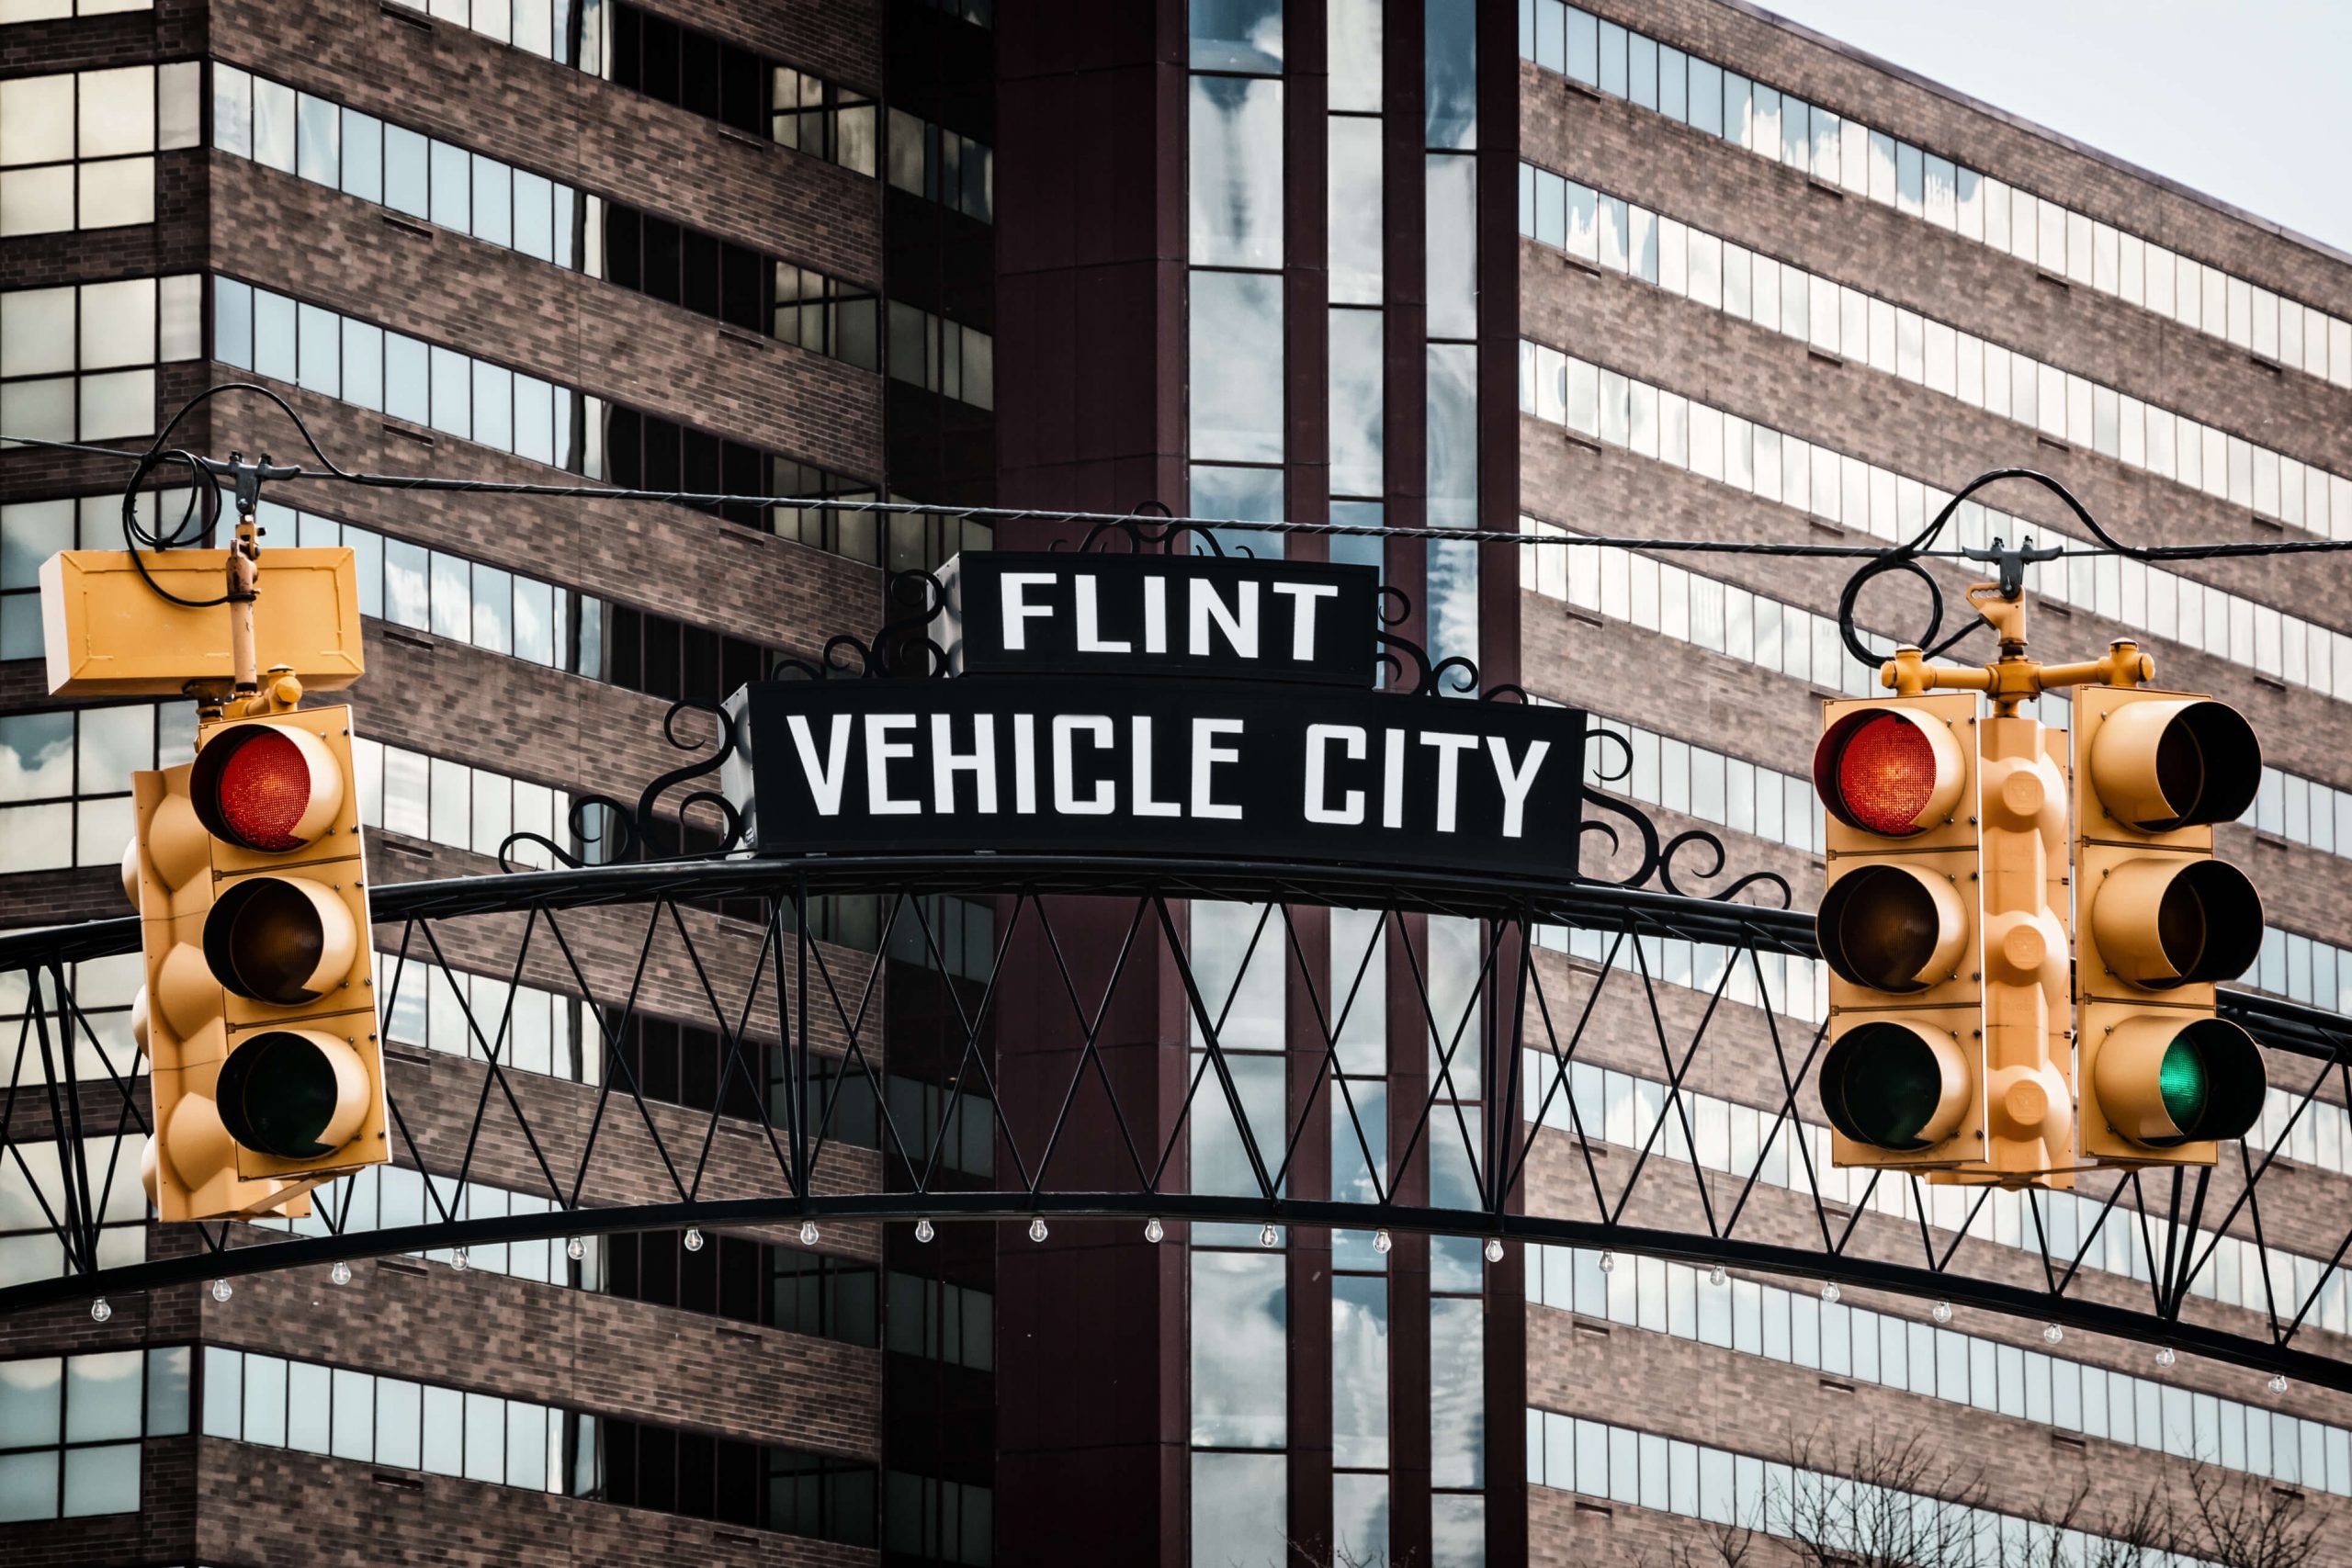 Join us in guiding the future of Downtown Flint